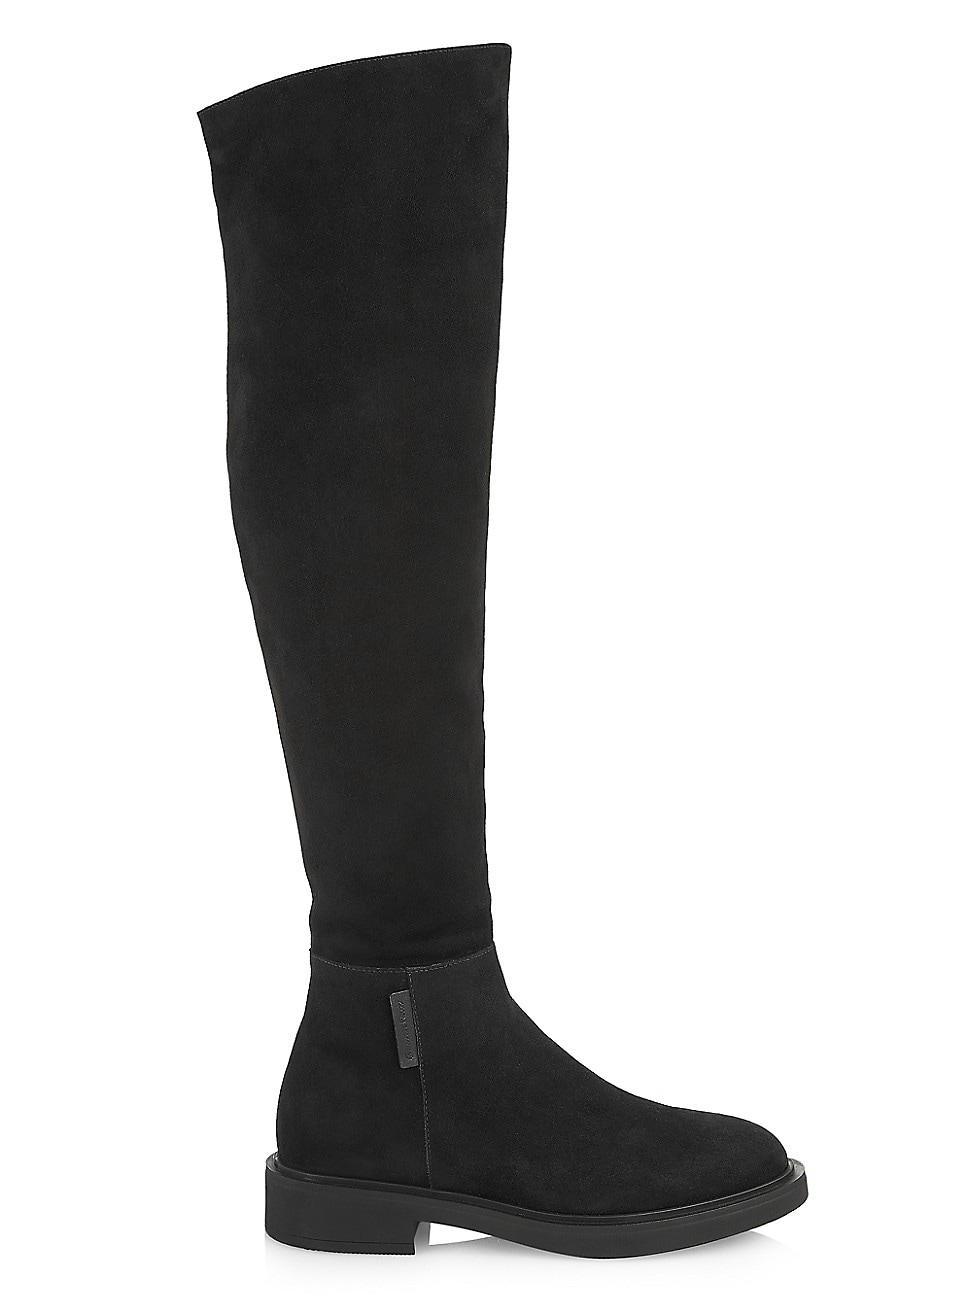 Womens Lexington Suede Over-The-Knee Boots Product Image